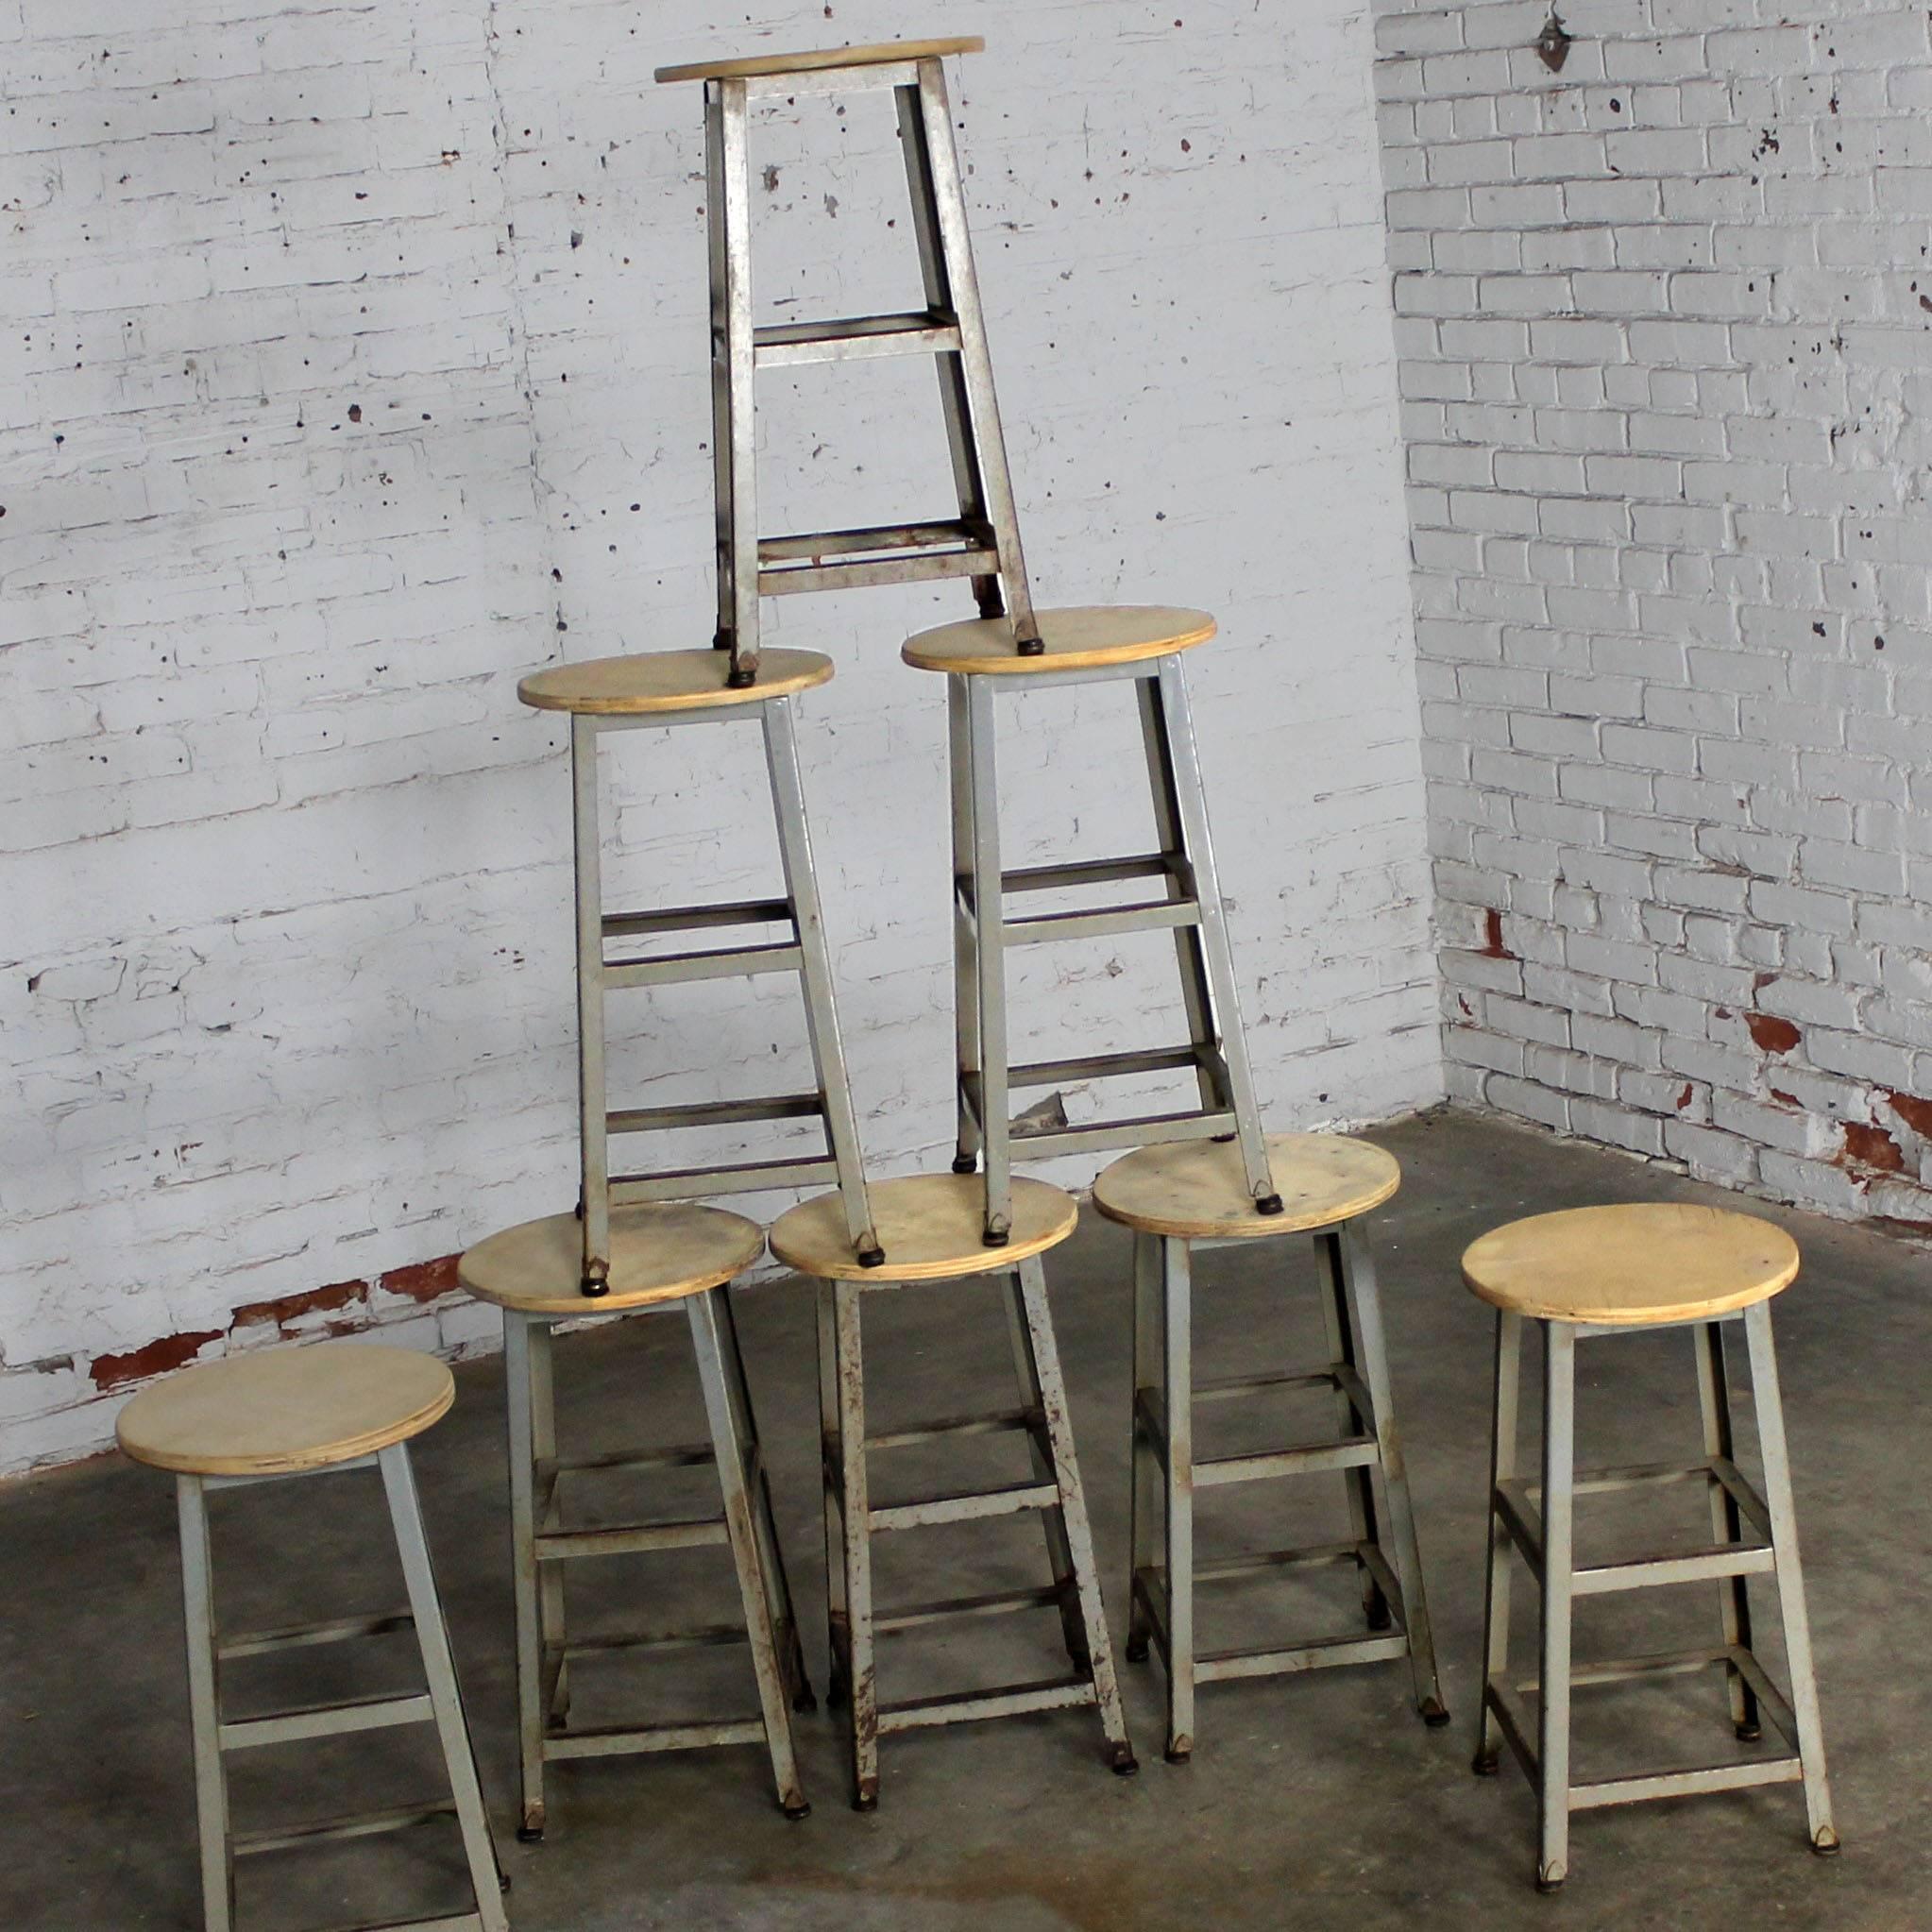 Vintage Industrial counter height steel stools with fabulous patinated finish that only comes with age. In wonderful condition. The wood tops have been sanded and are ready to be oiled, clear coated, painted or left natural to let age, circa